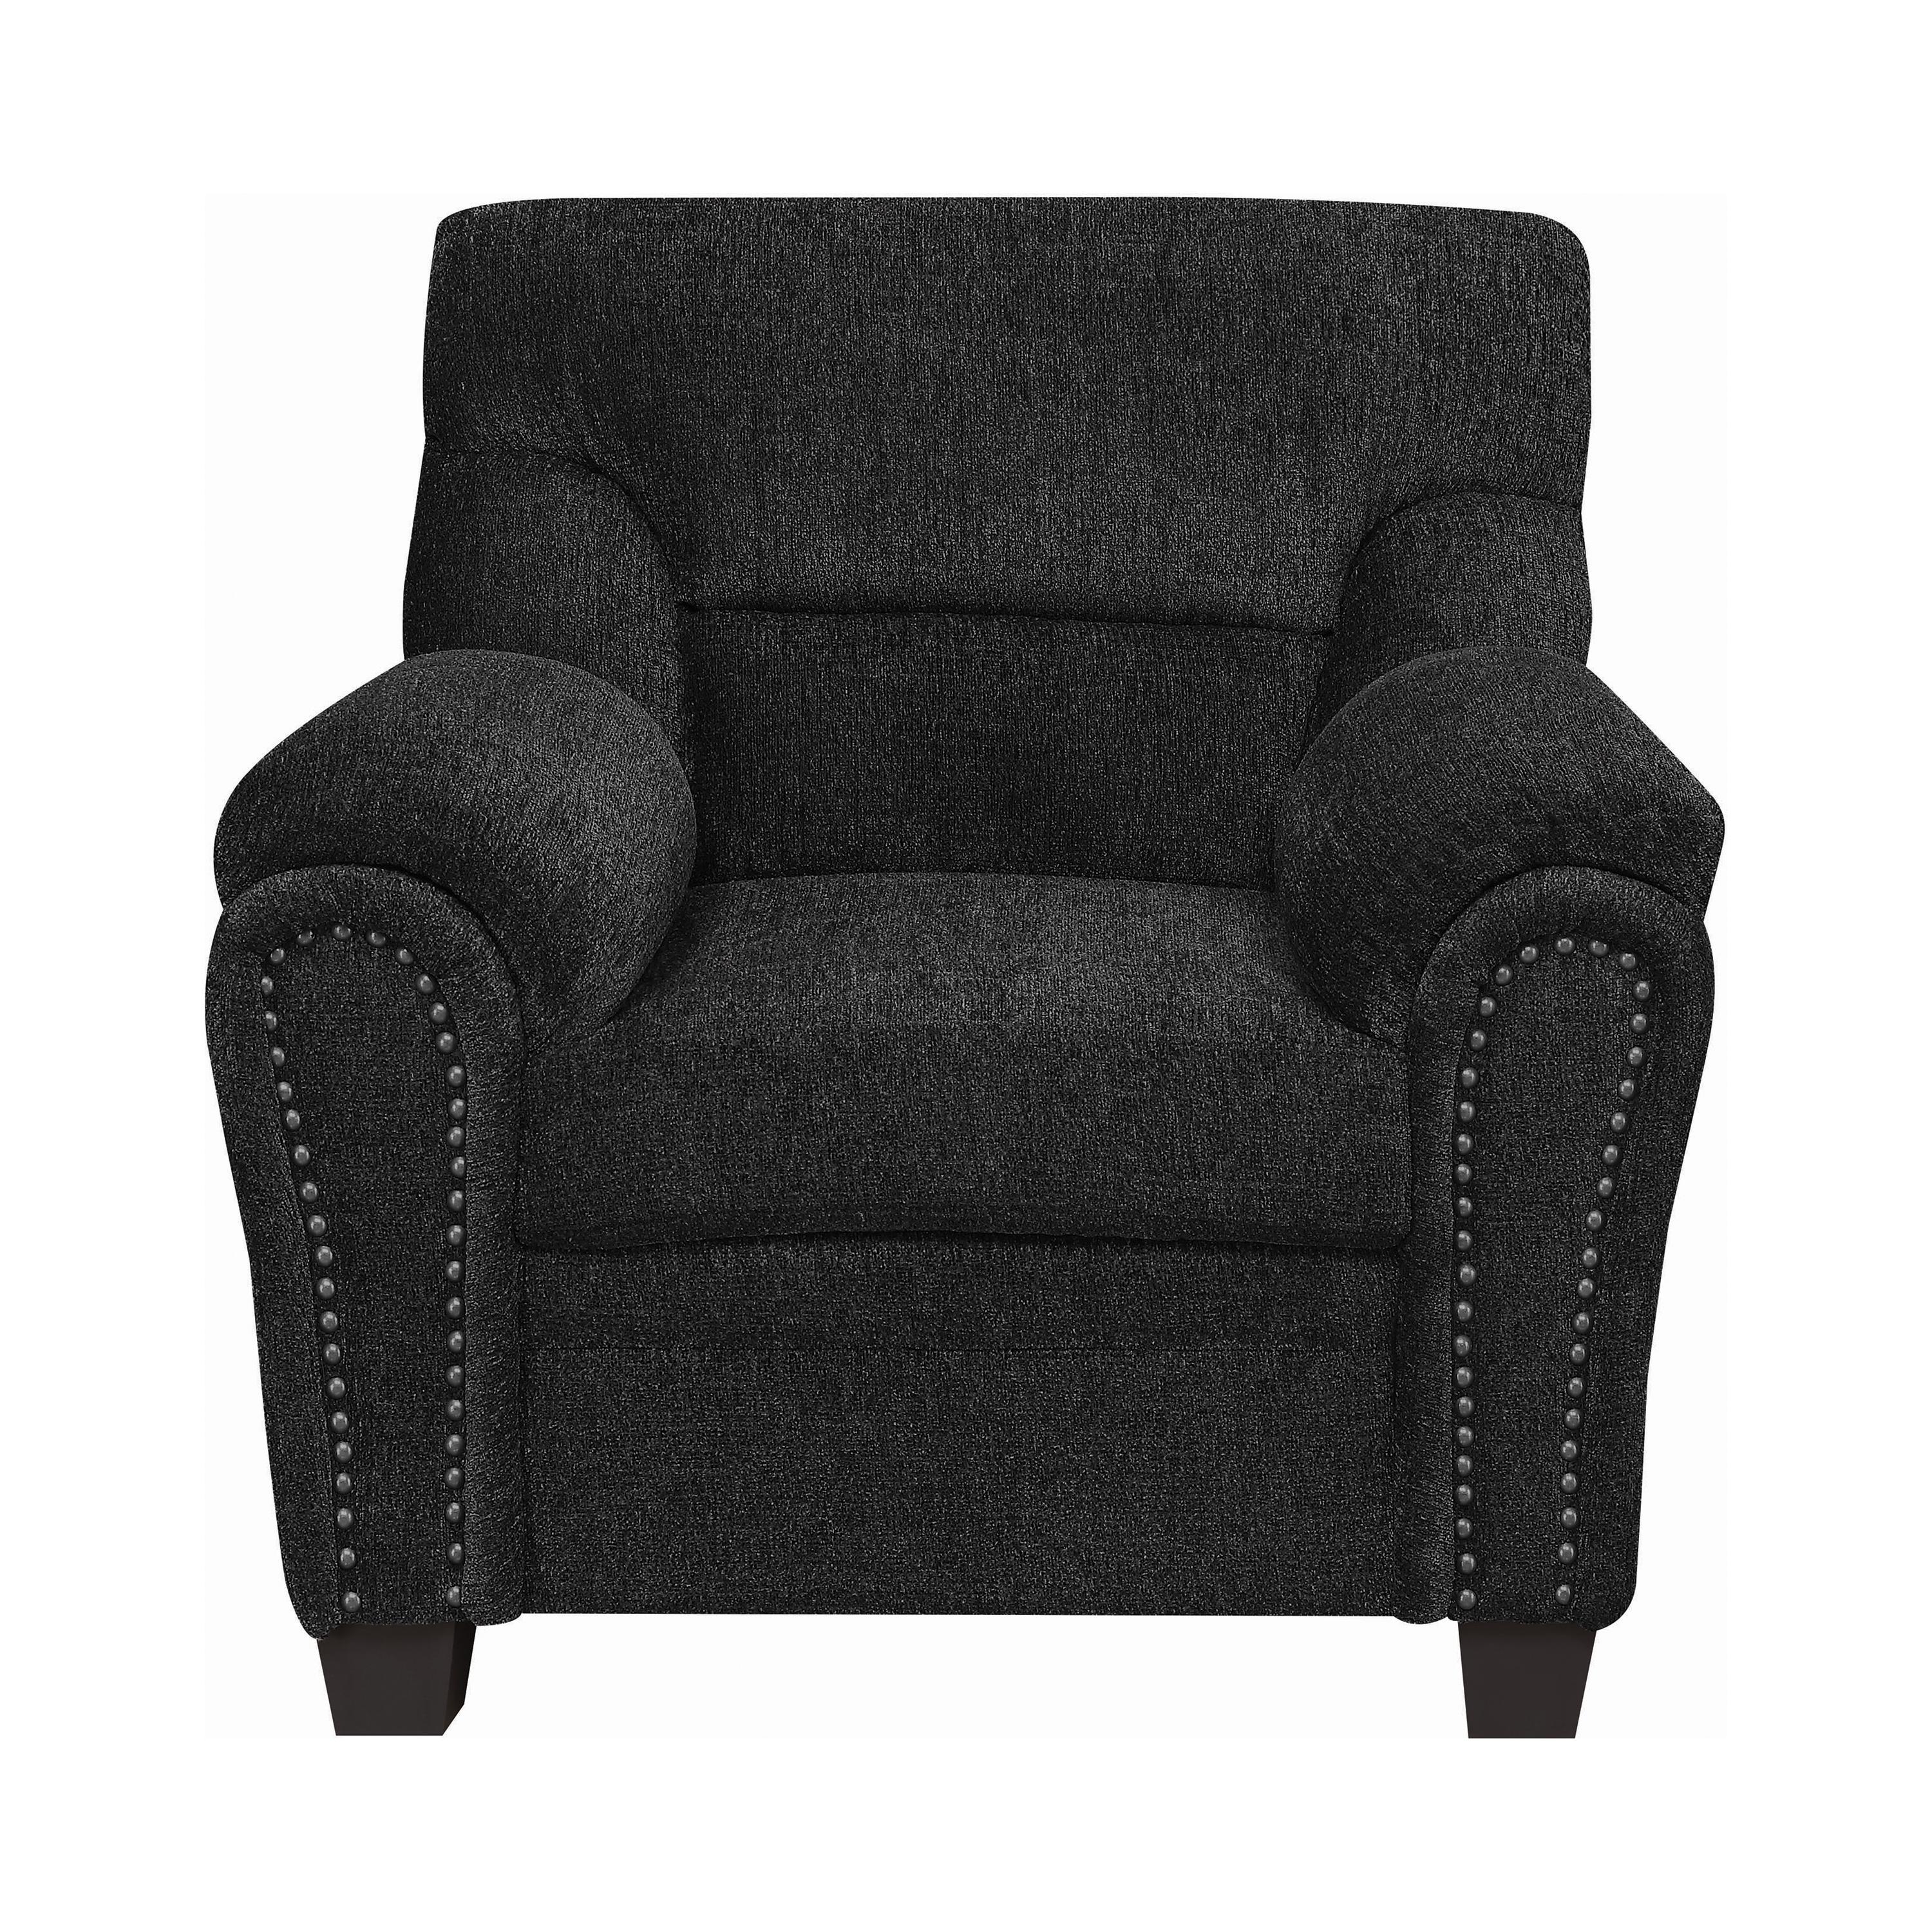 Transitional Arm Chair 506576 Clemintine 506576 in Graphite Chenille